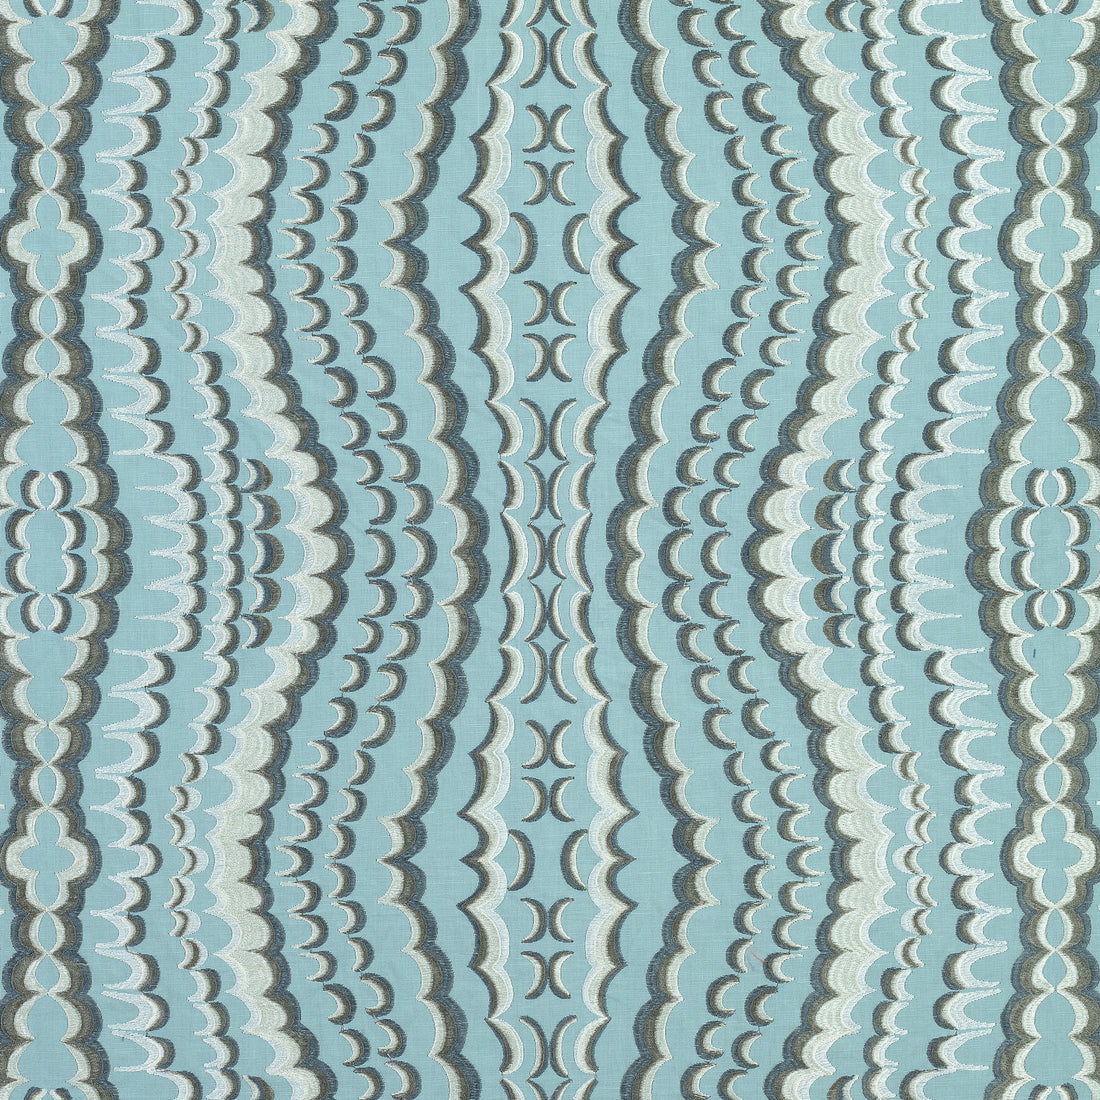 Ebru Embroidery fabric in aqua color - pattern number W72983 - by Thibaut in the Paramount collection